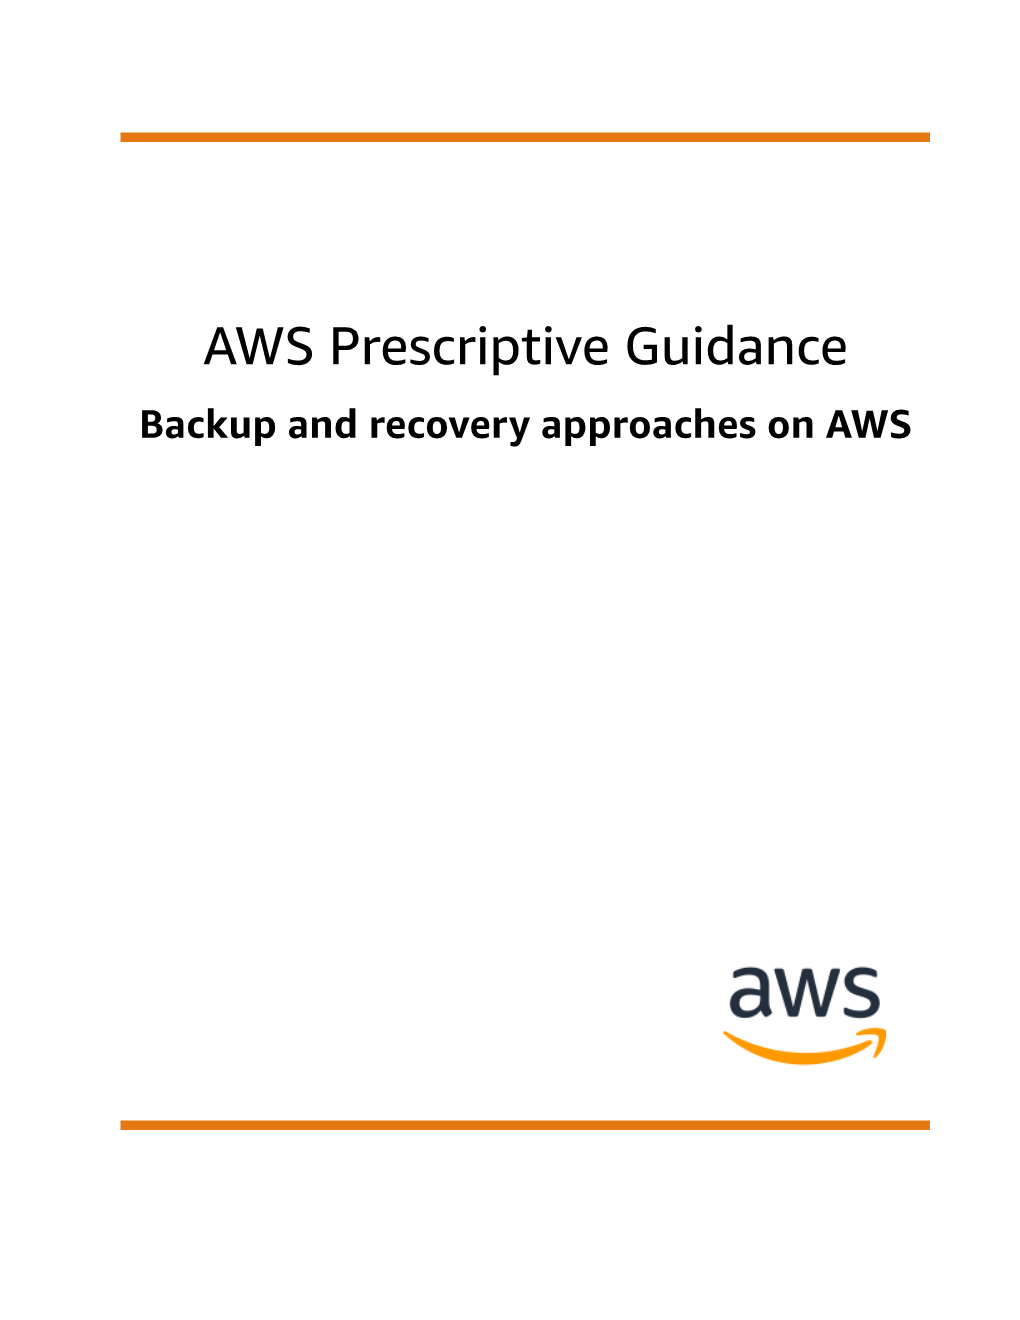 AWS Prescriptive Guidance Backup and Recovery Approaches on AWS AWS Prescriptive Guidance Backup and Recovery Approaches on AWS